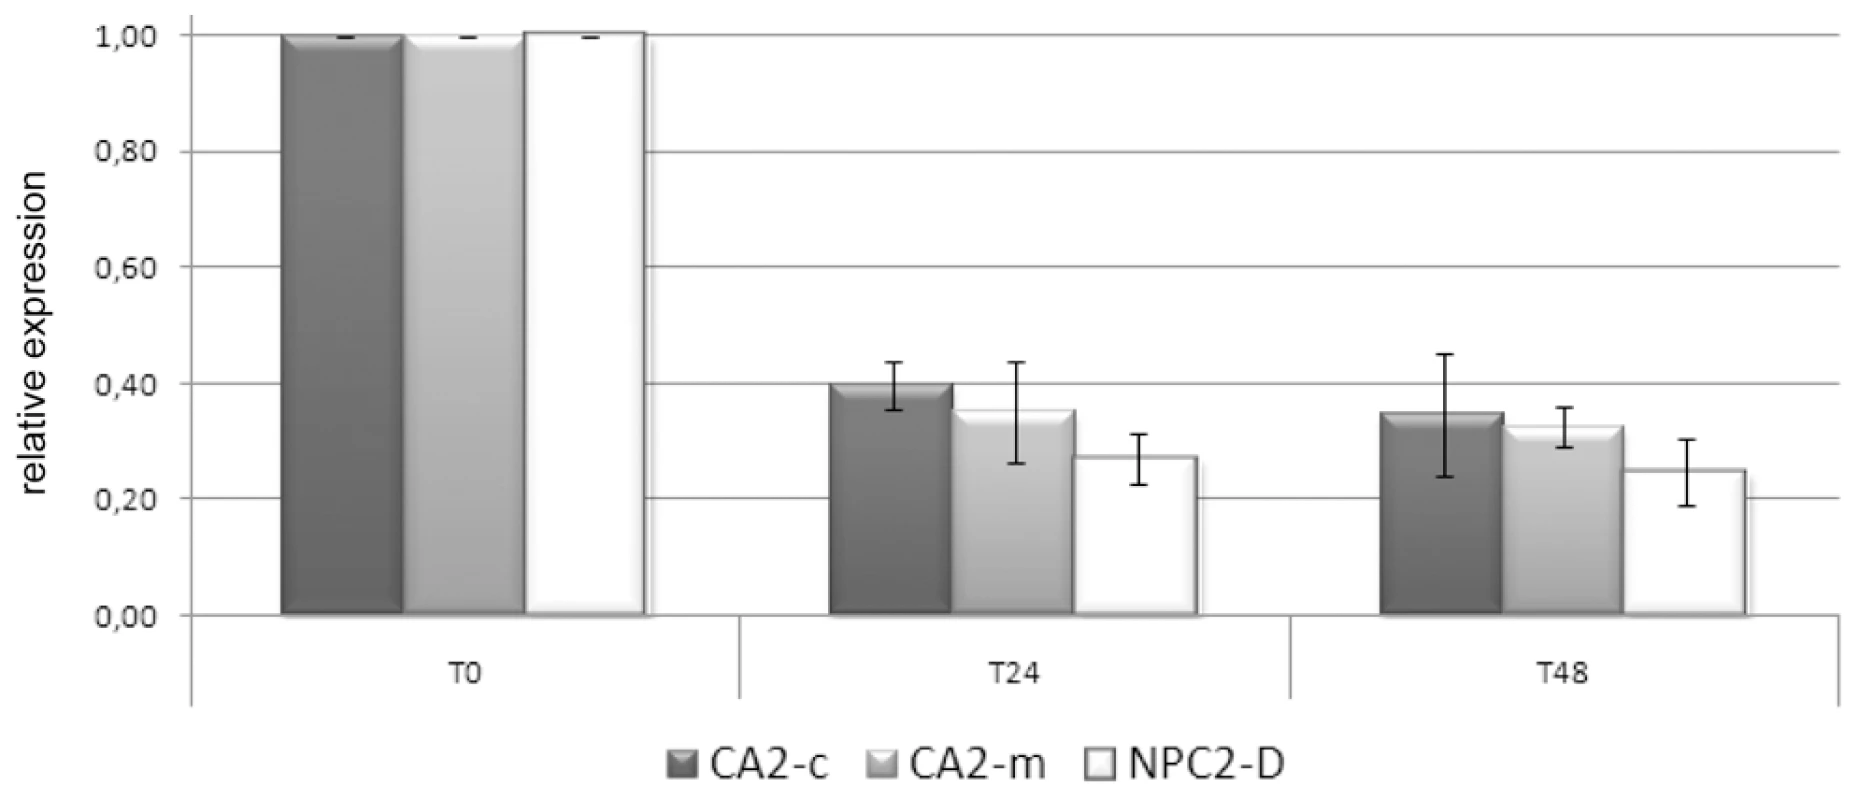 CA2-m, CA2-c, and NPC2-D expression in response to imposed thermal stress.